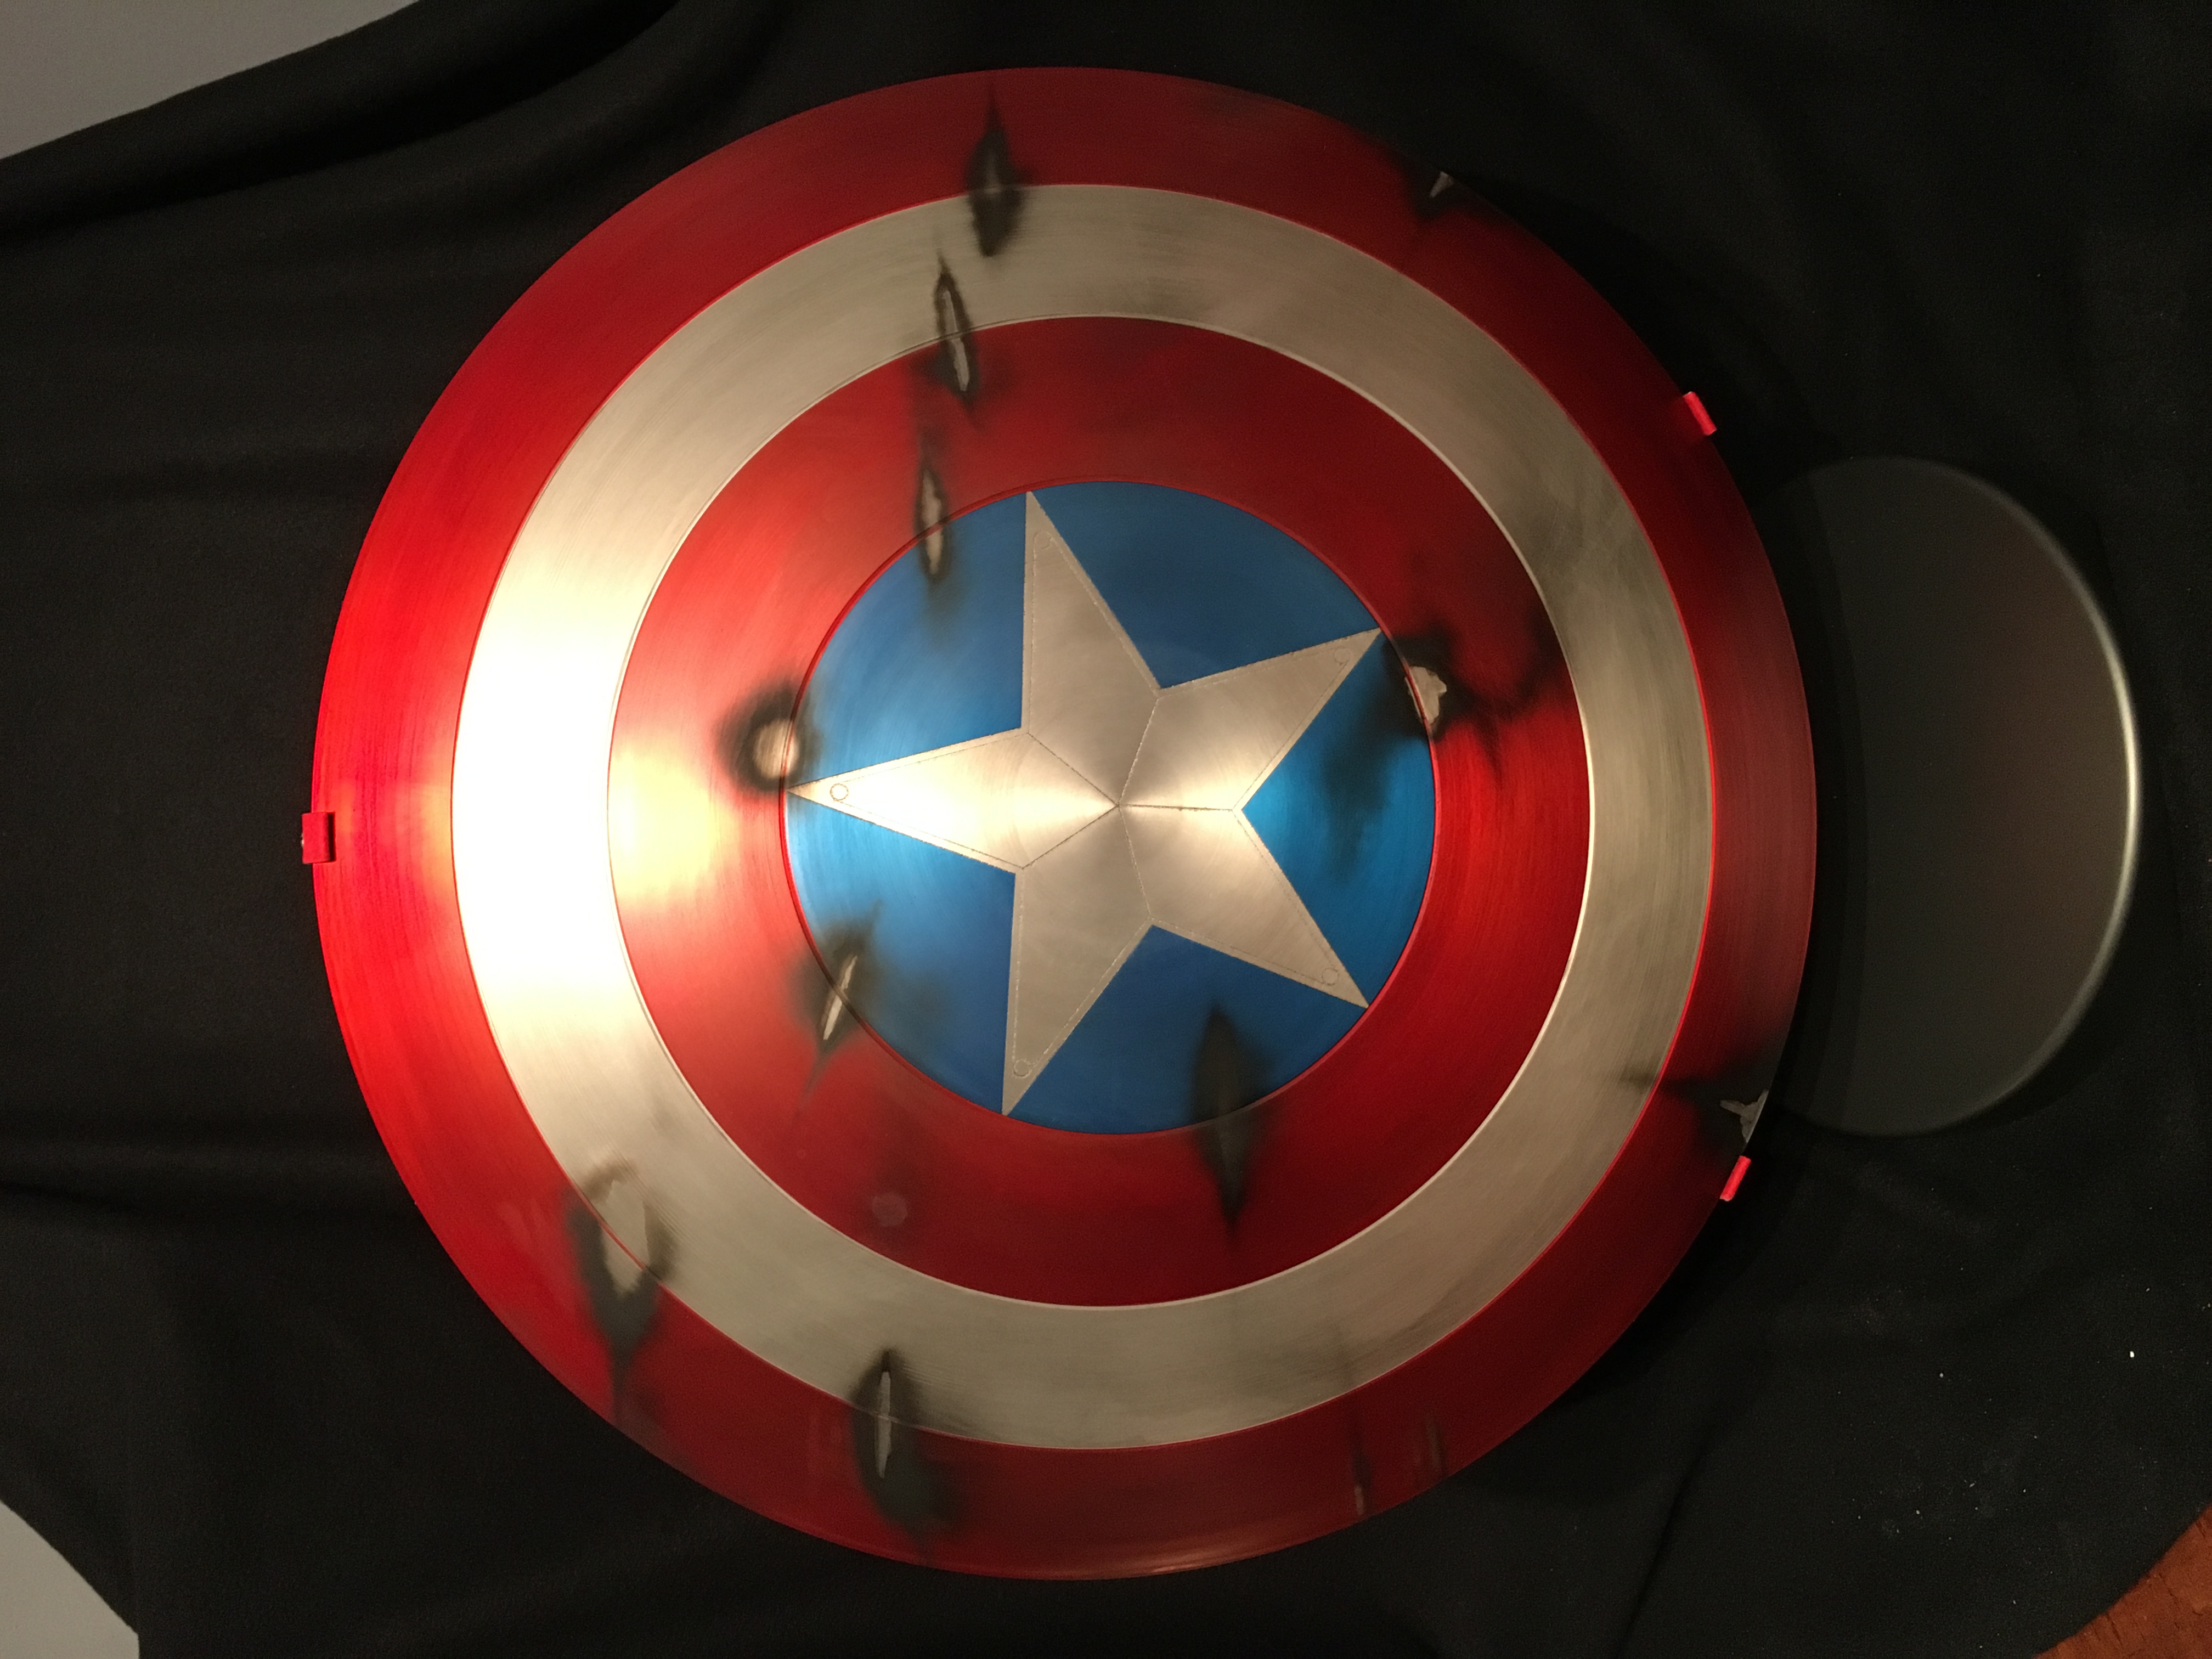 Captain America "The First Avenger" Battle Shield
Shield by phebert
Paint and weathering by Artisan FX displayed in custom Artisan FX shield base